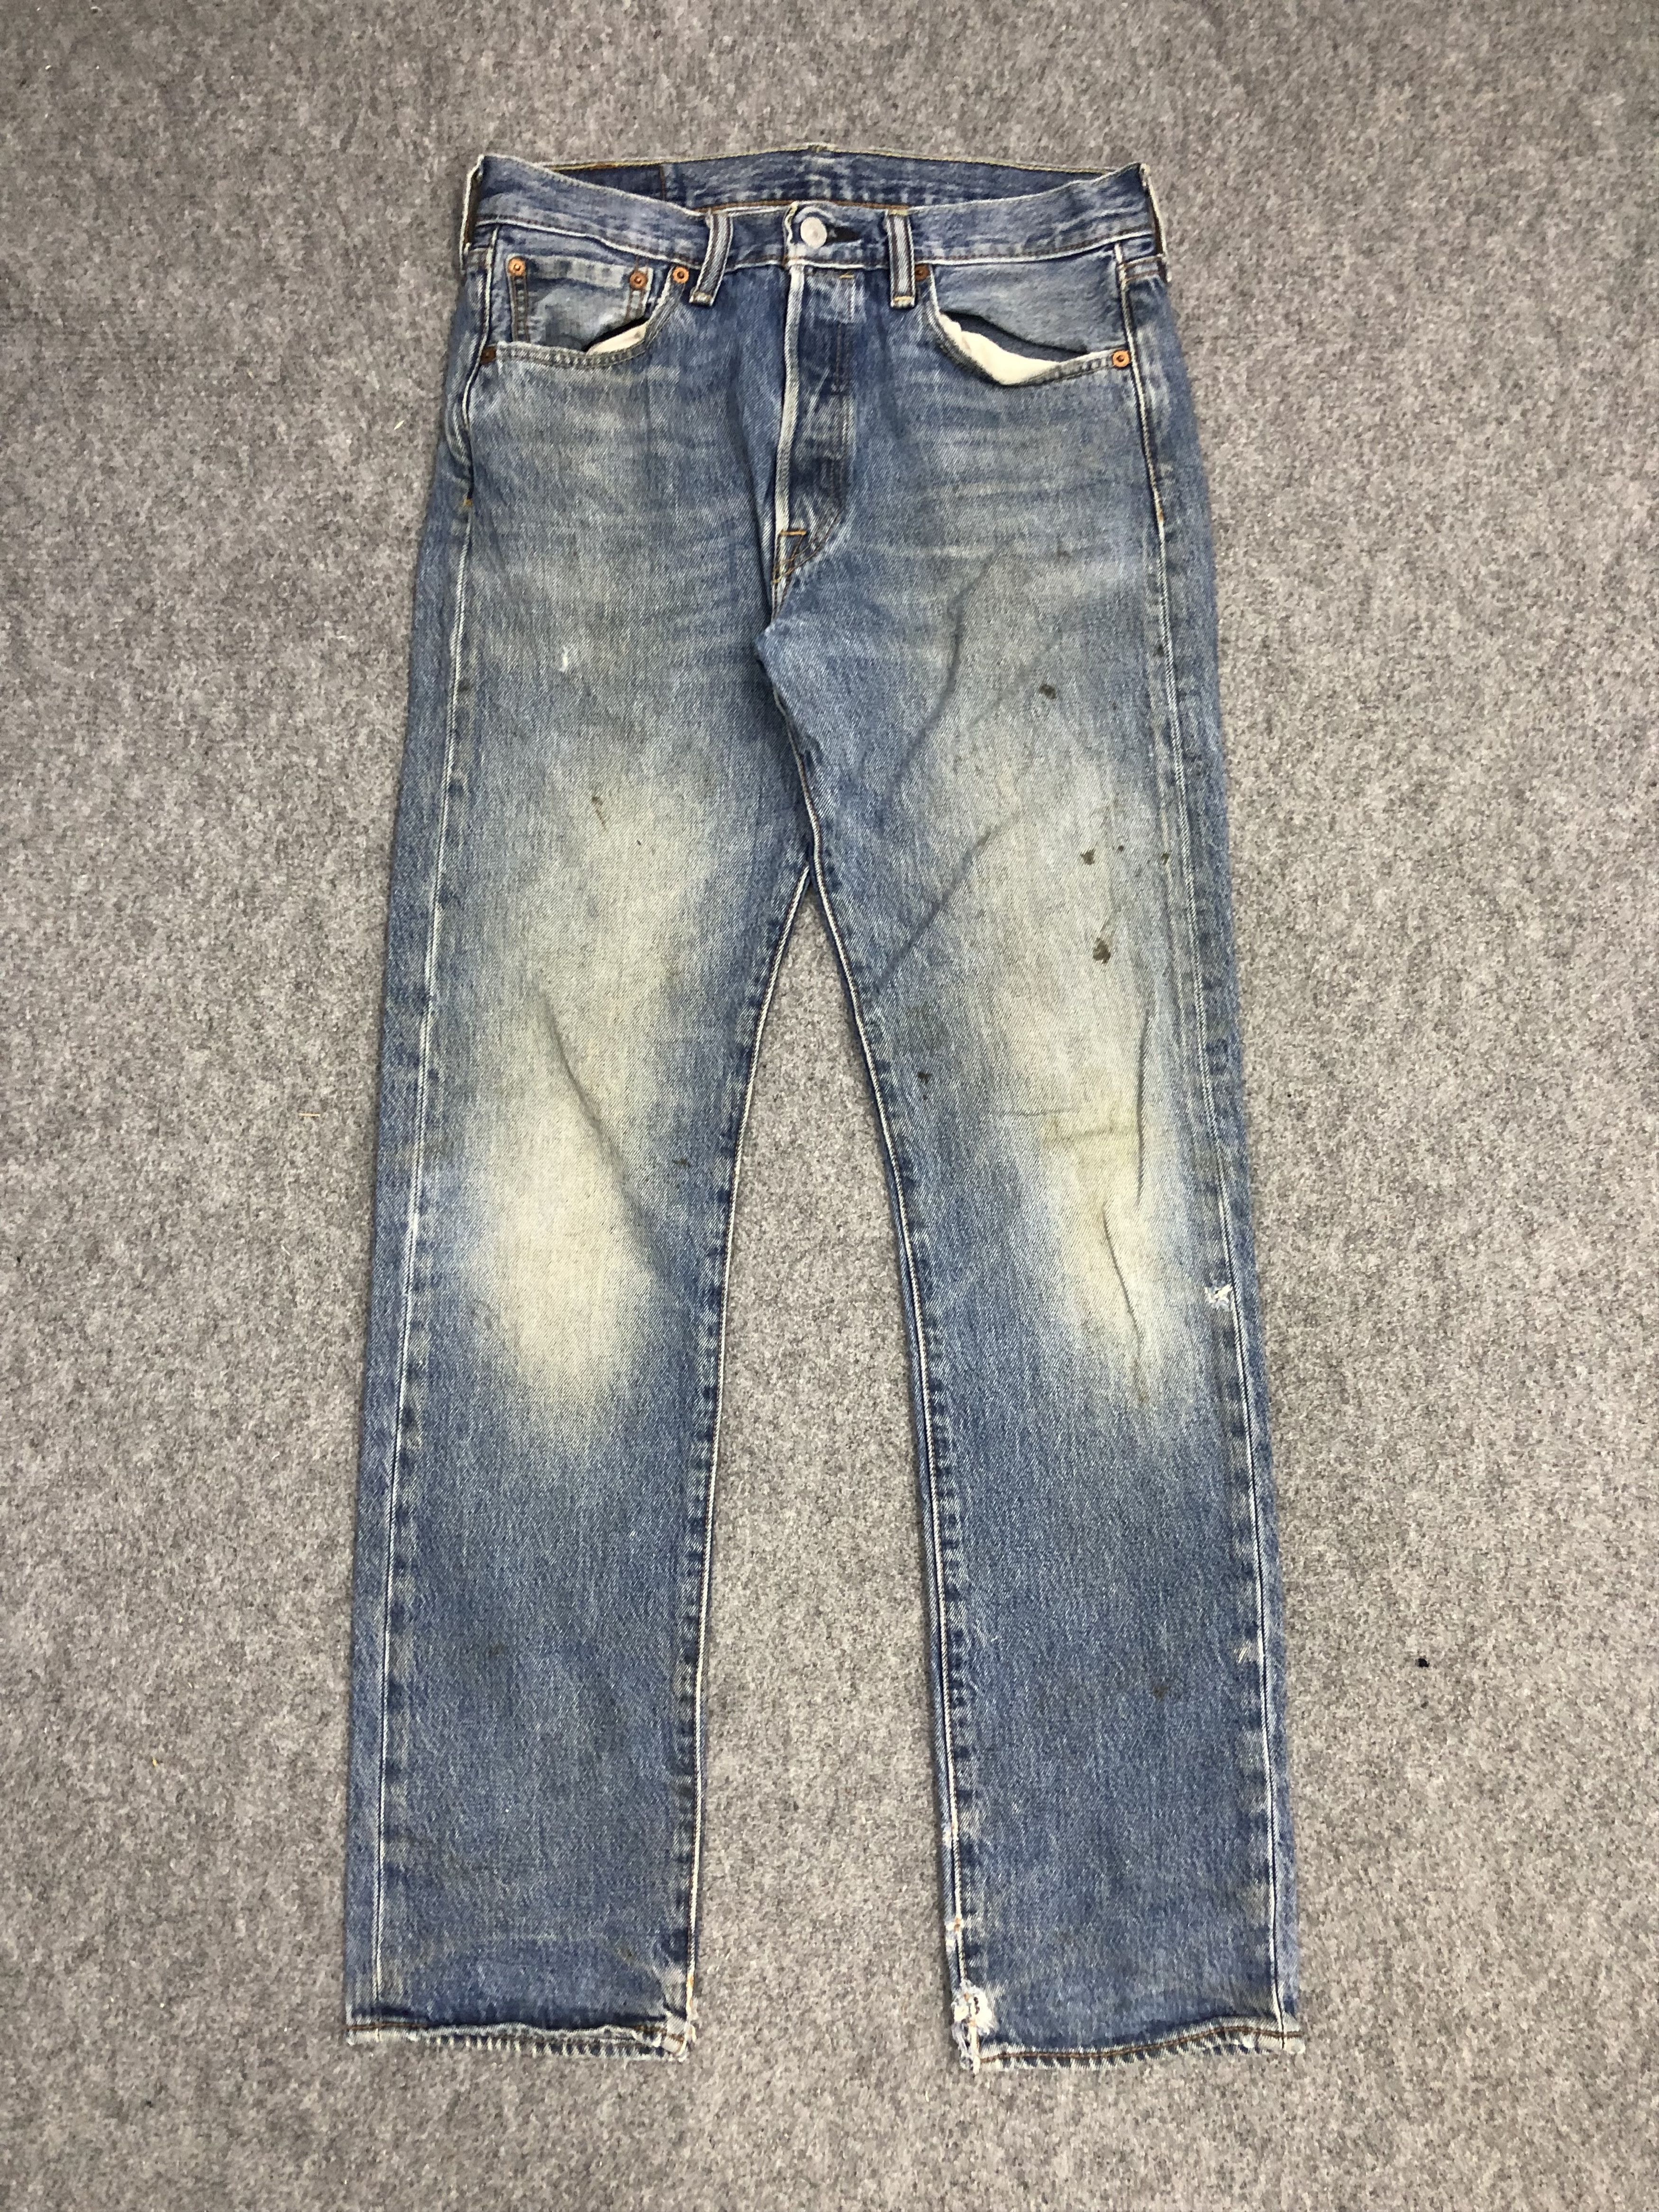 Preworn Levi's jeans from 1880s found in mine sold for $87,000